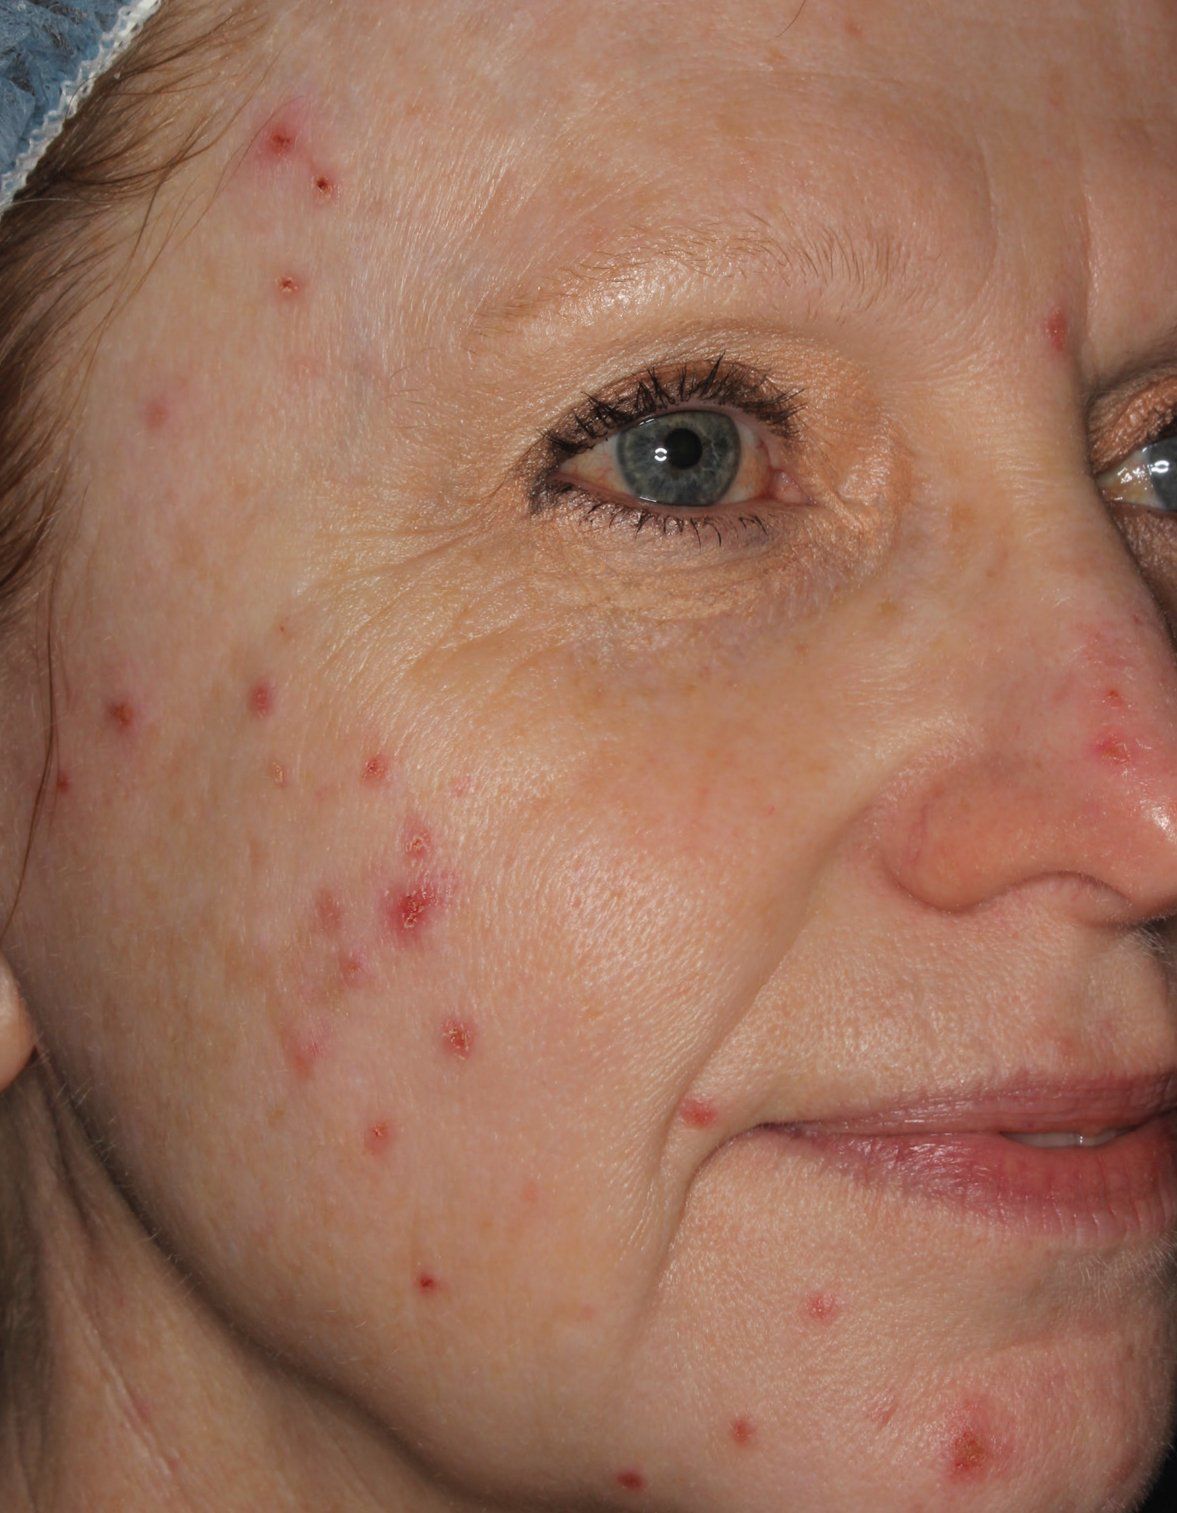 BBL Before Photo - A close up of a woman 's face with acne on it.